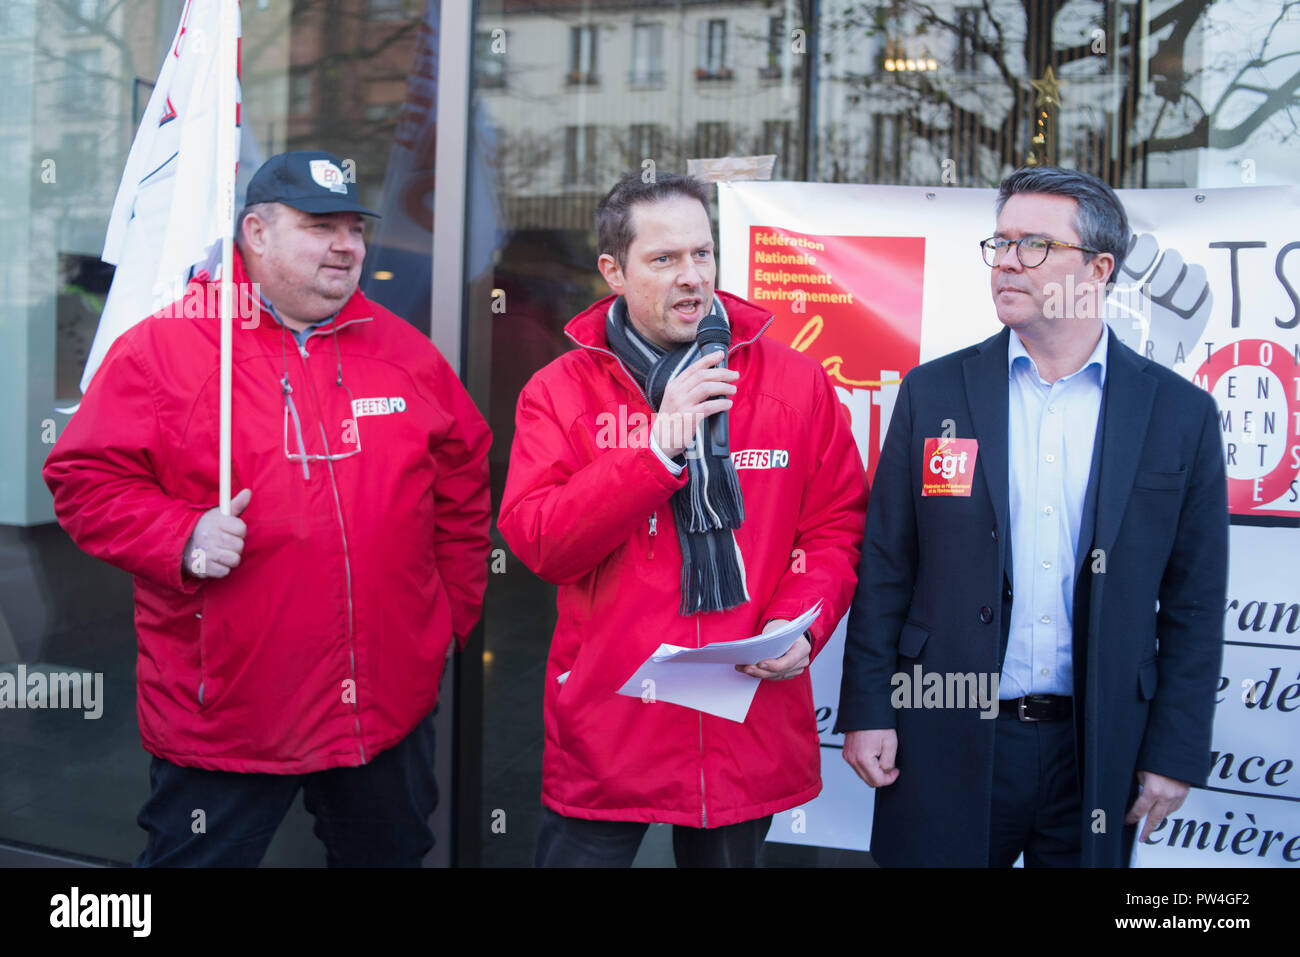 Demonstration against the deletions of posts at Météo France in front of the headquarters of Météo-France and the IGN. Stock Photo